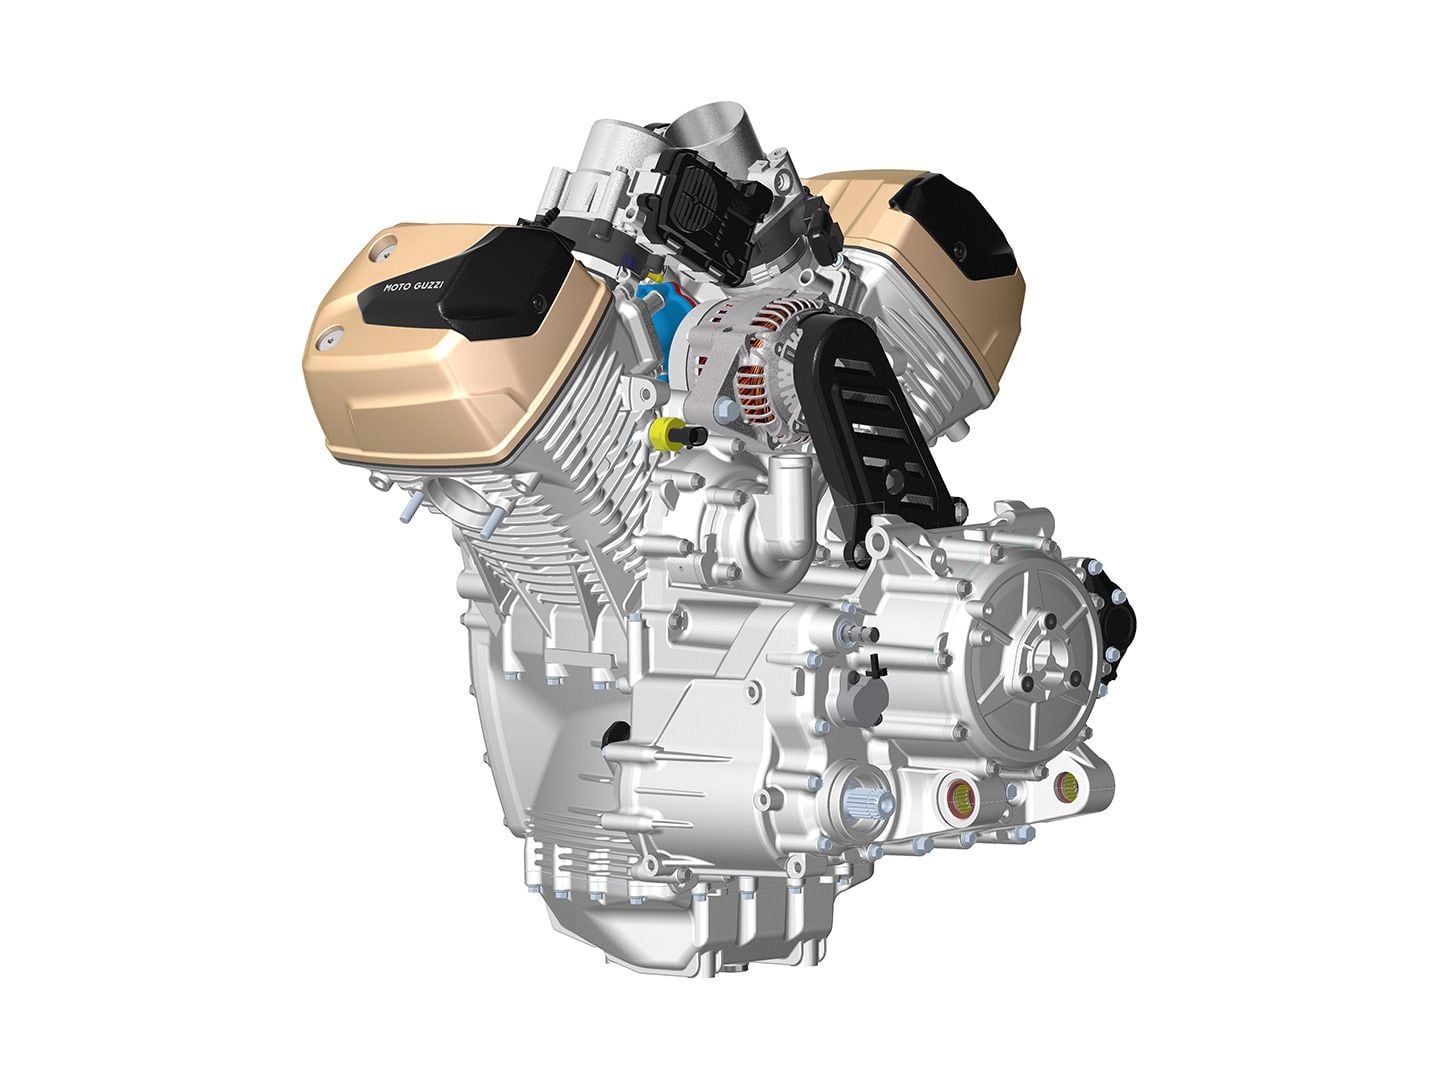 CAD images of Moto Guzzi’s new V100 Mandello engine show how compact this new liquid-cooled design is.